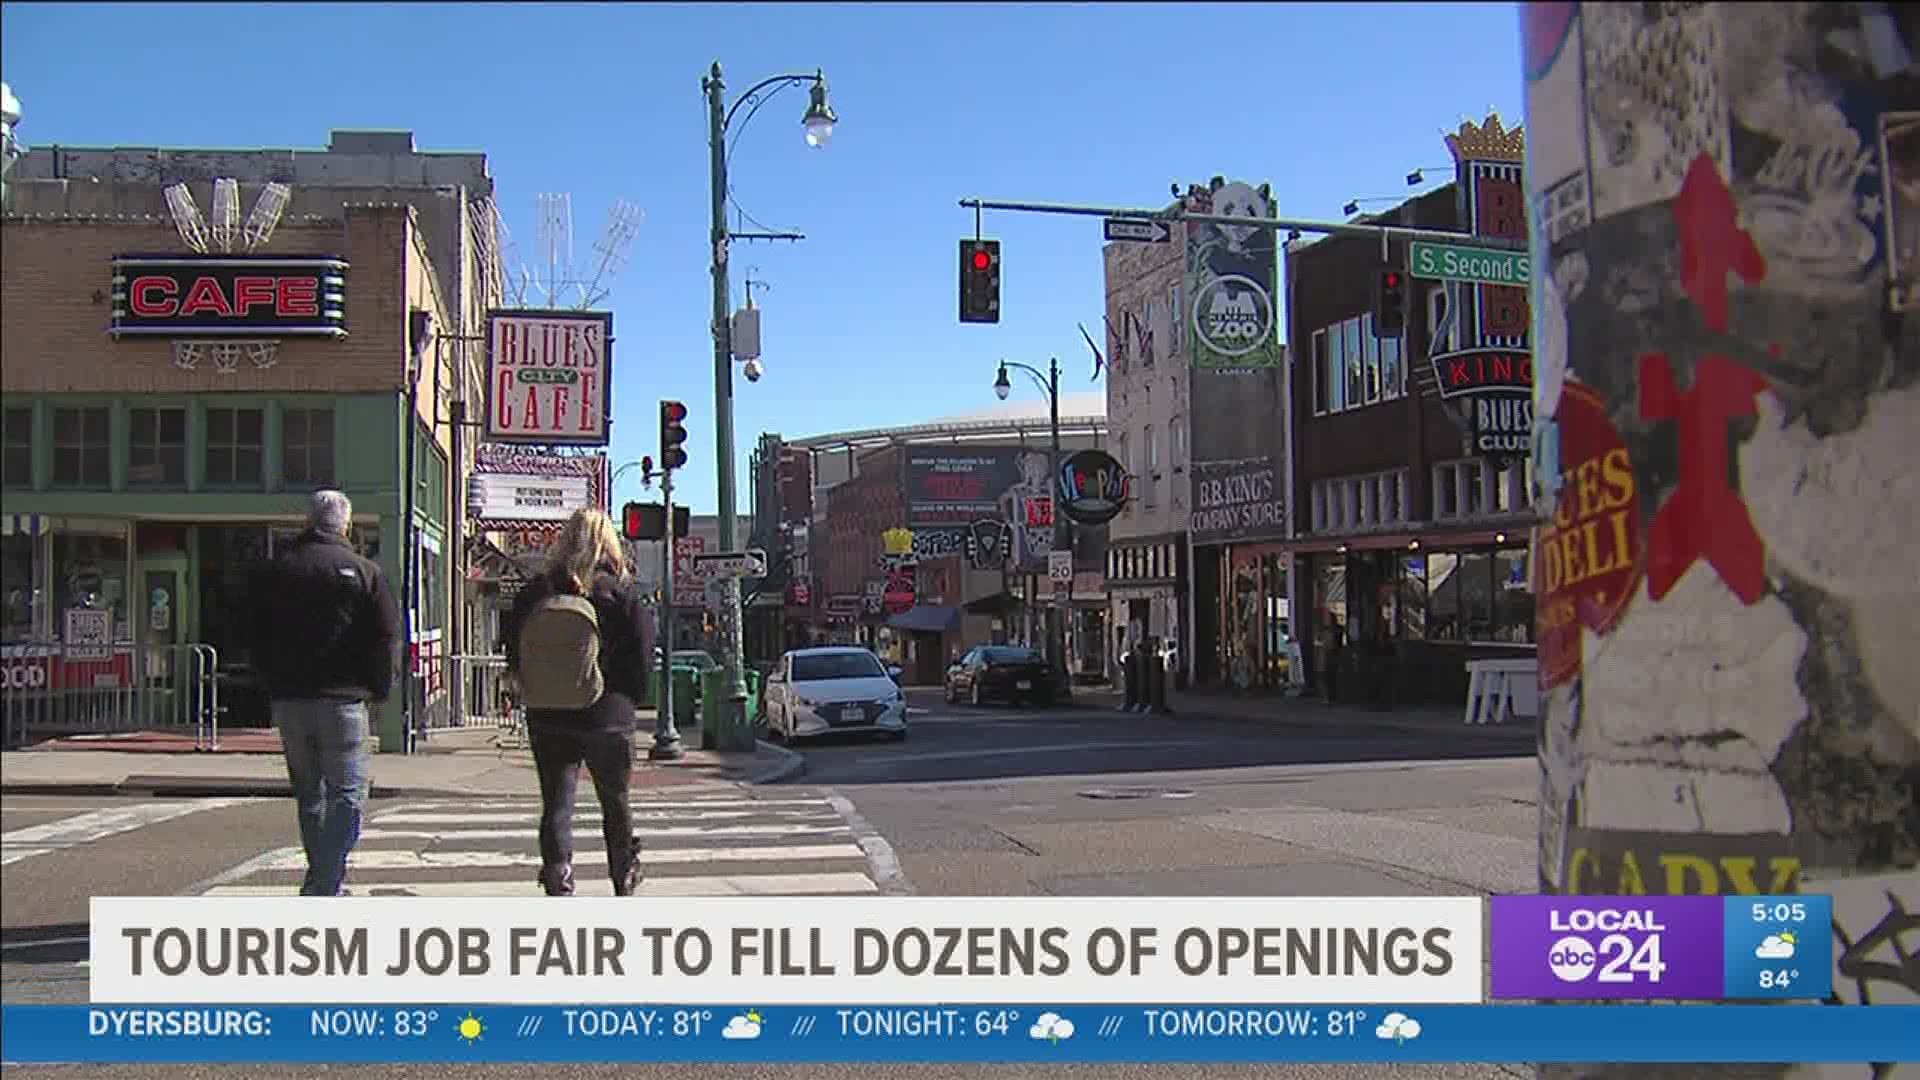 Hiring back jobs lost during the pandemic continues to be a struggle for local business as tourism begins to return.